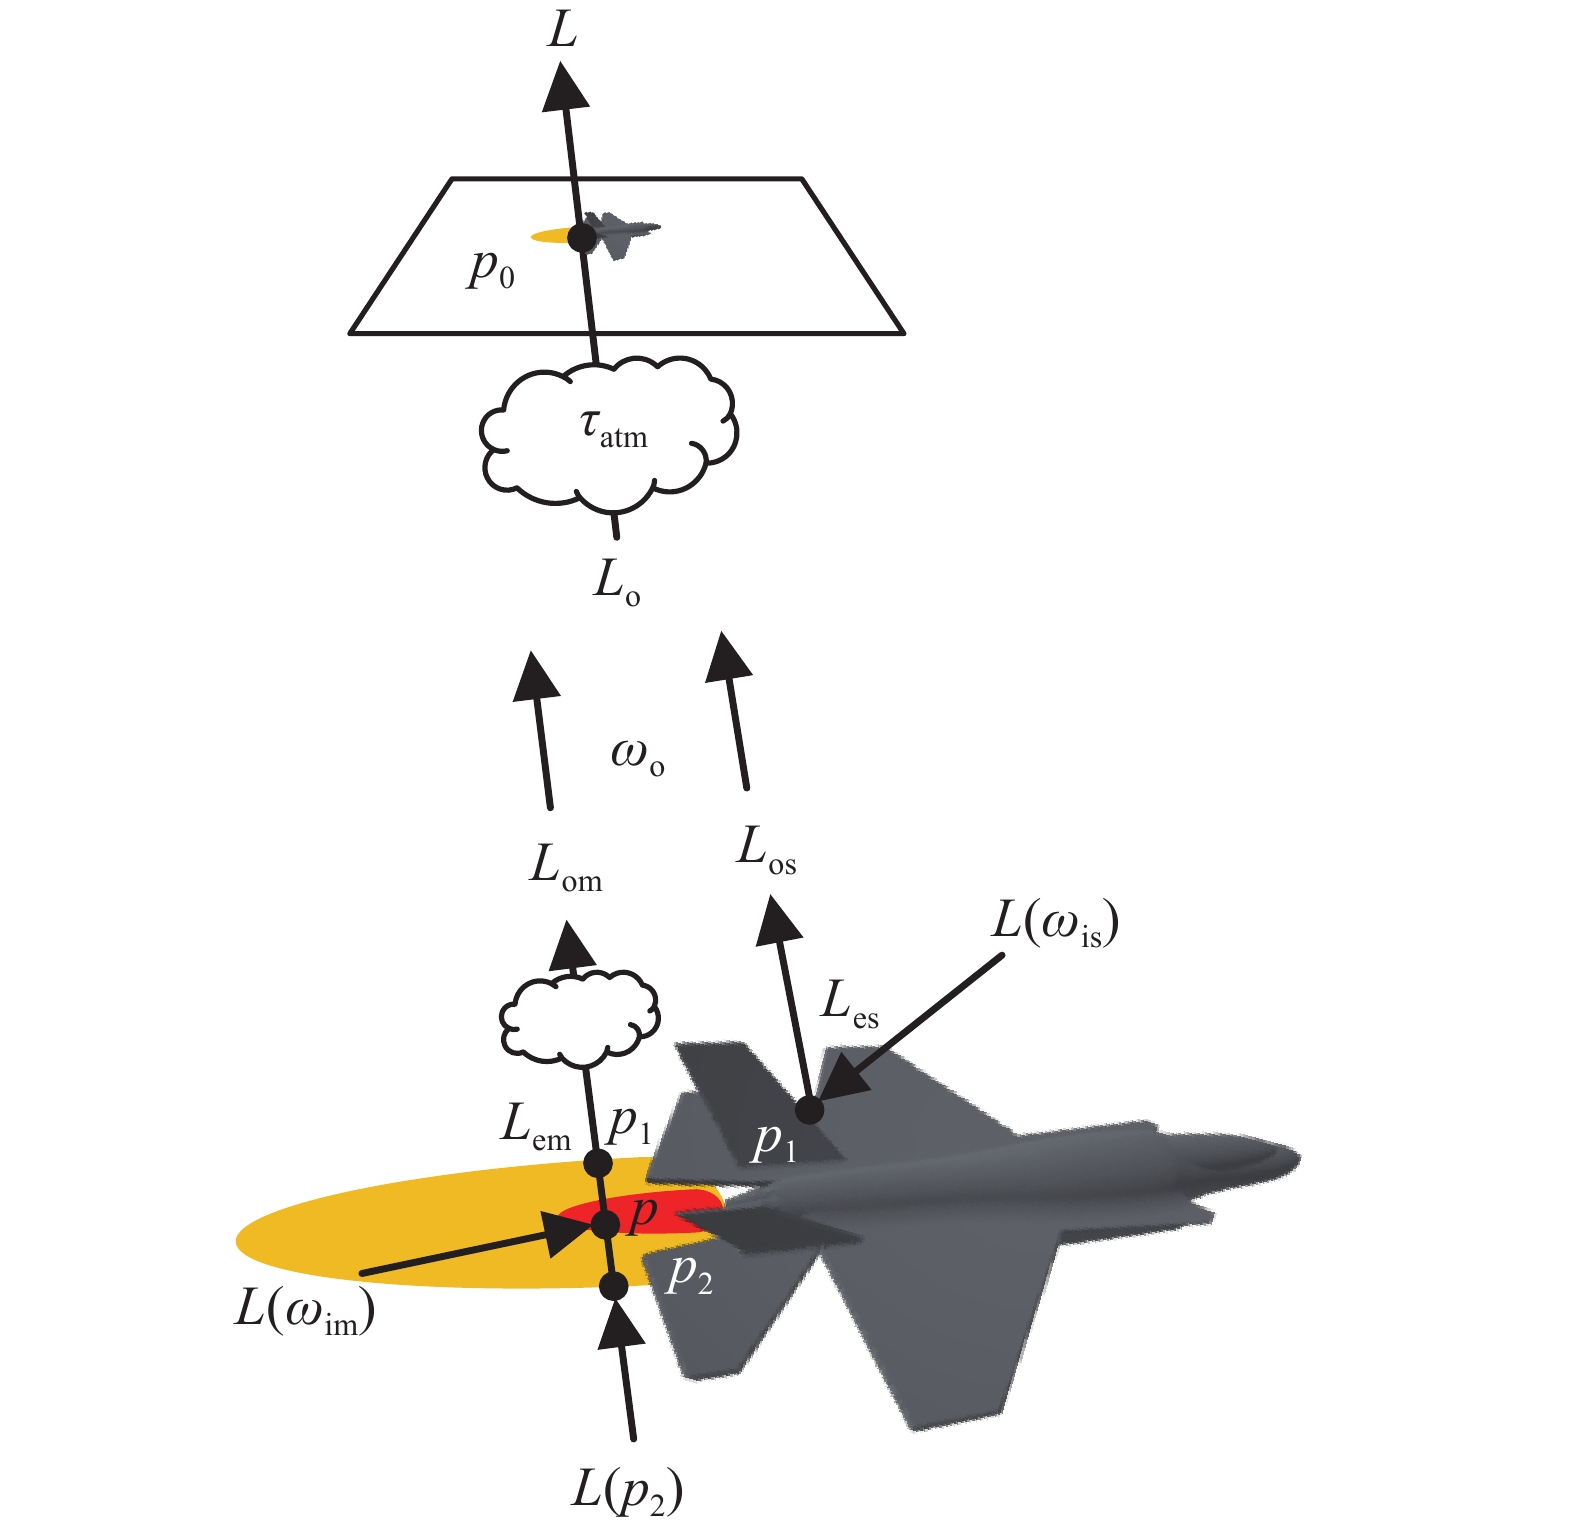 Schematic diagram of aircraft infrared imaging radiance transmission